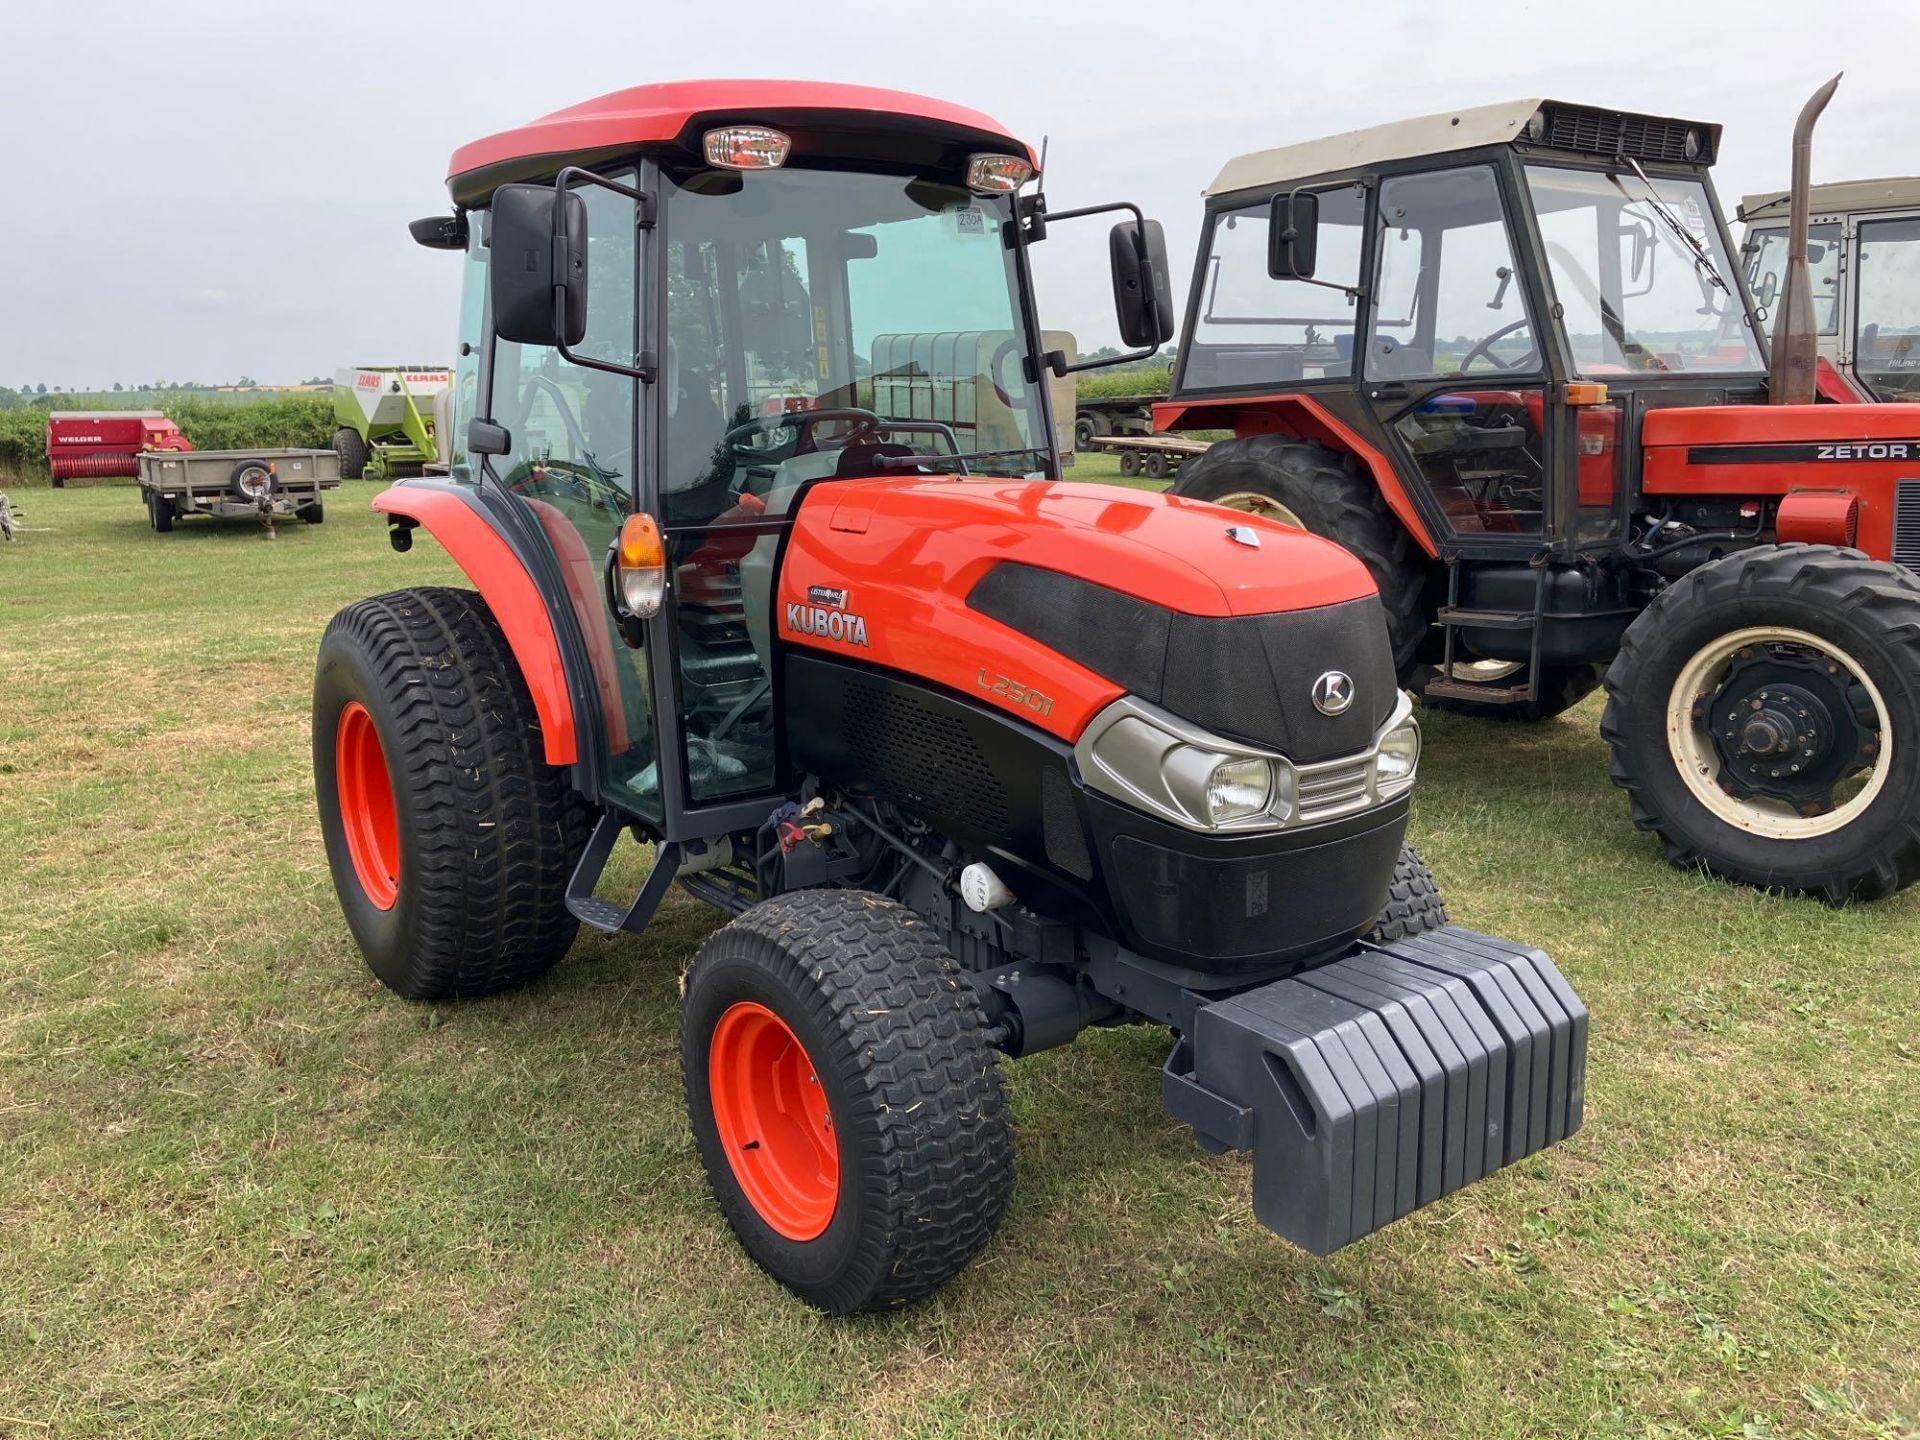 2020 Kubota L2501 4wd compact tractor with air con, DAB radio, CAT1 link arms, 2 rear spools, front - Image 4 of 14